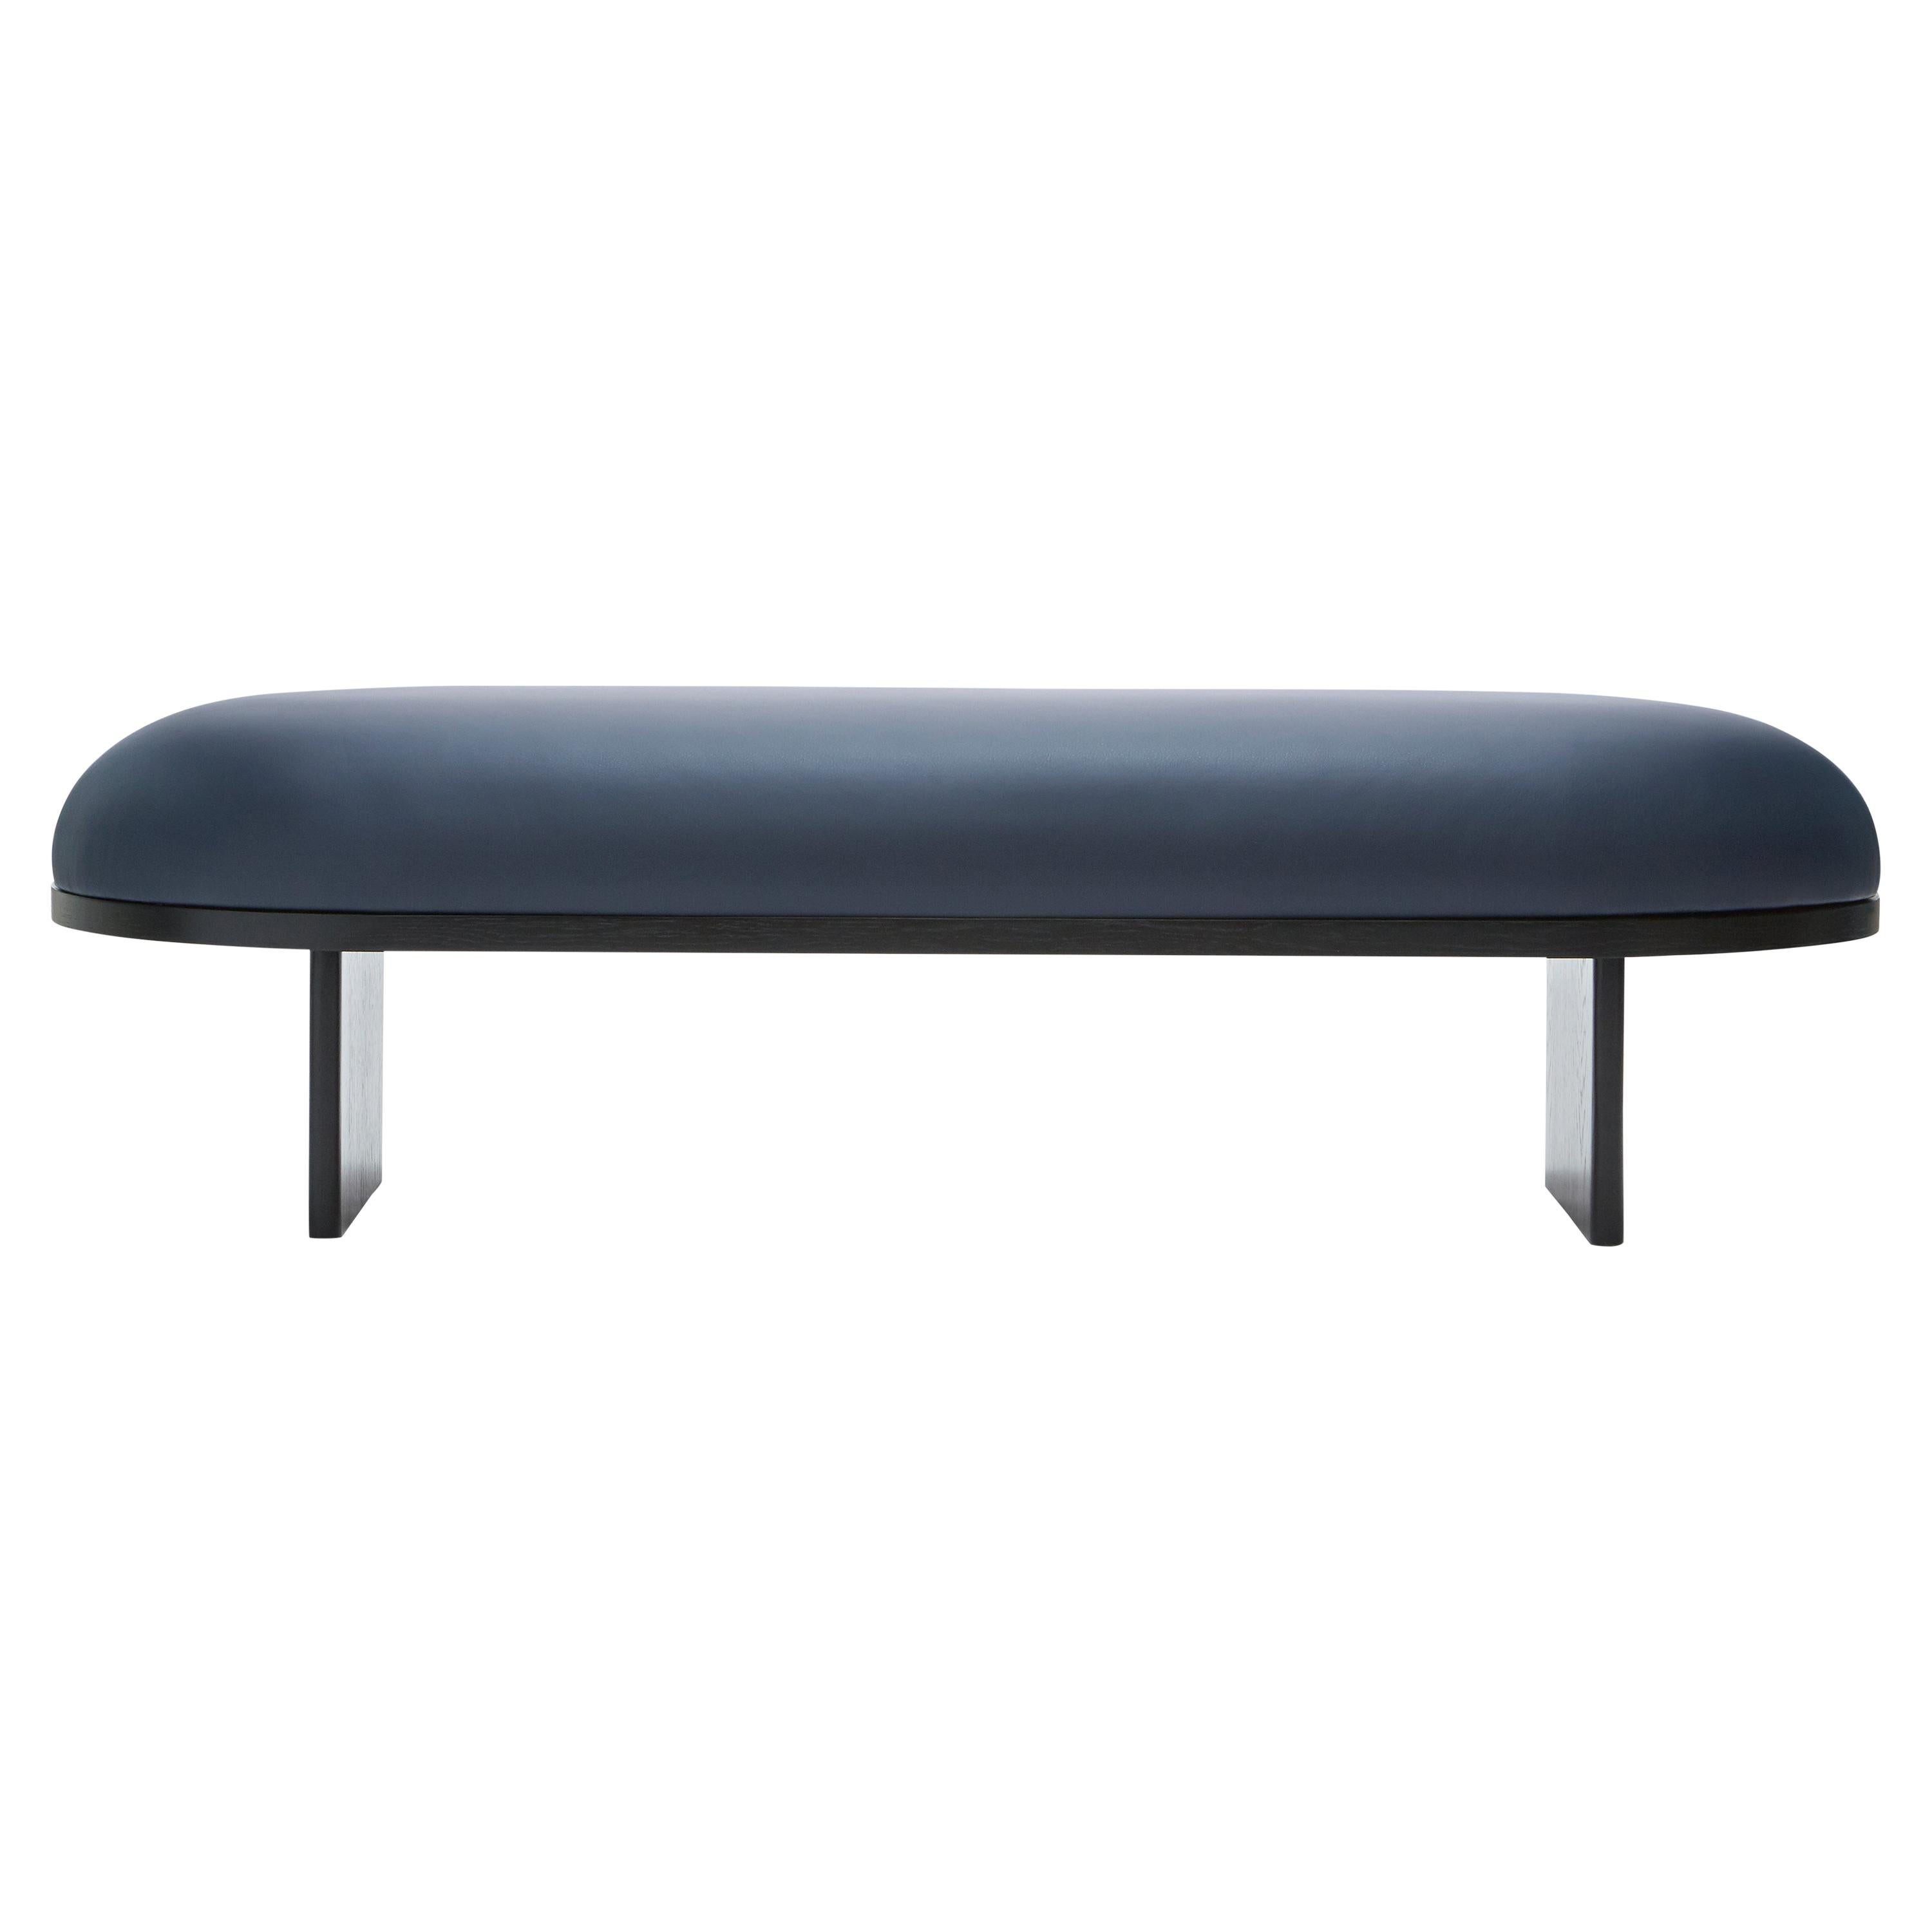 En vente : Black (Stained Black) Anza Large Upholstered Bench with Floating Cushion (Banc tapissé avec coussin flottant)